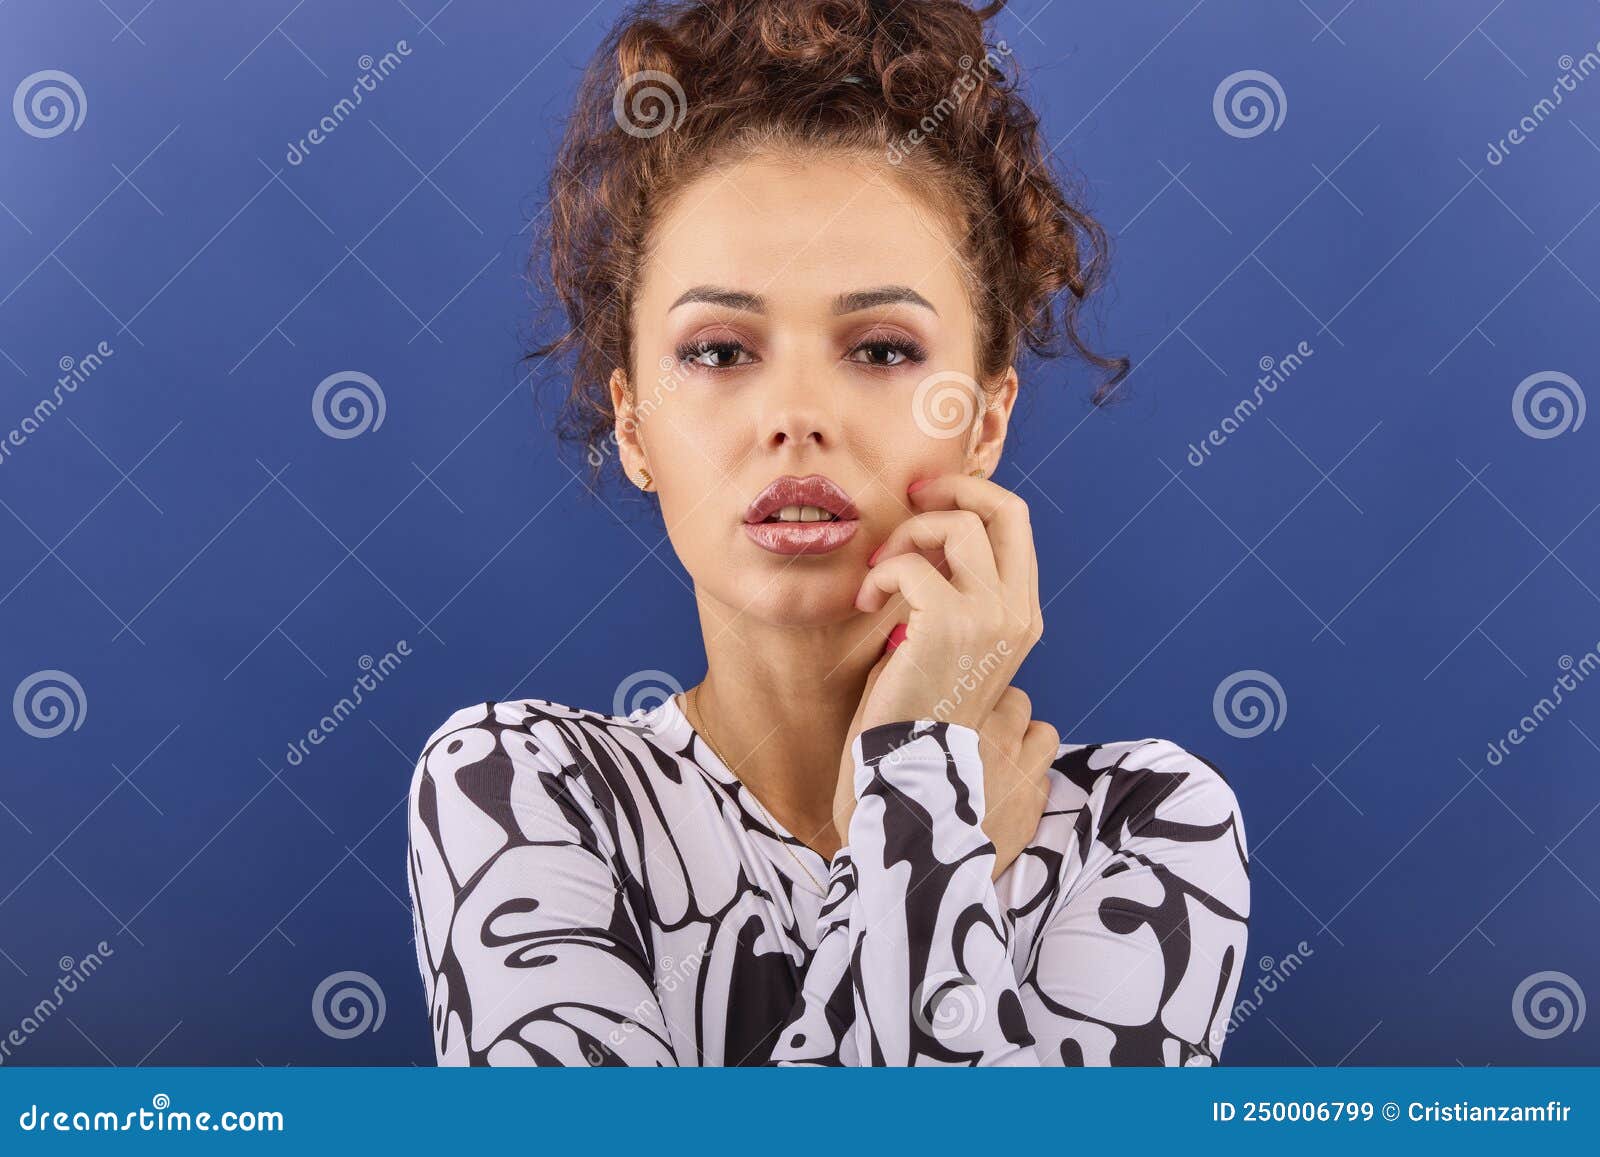 Woman With Curly Hair Poses In Different Positions On A Blue Background Stock Image Image Of 